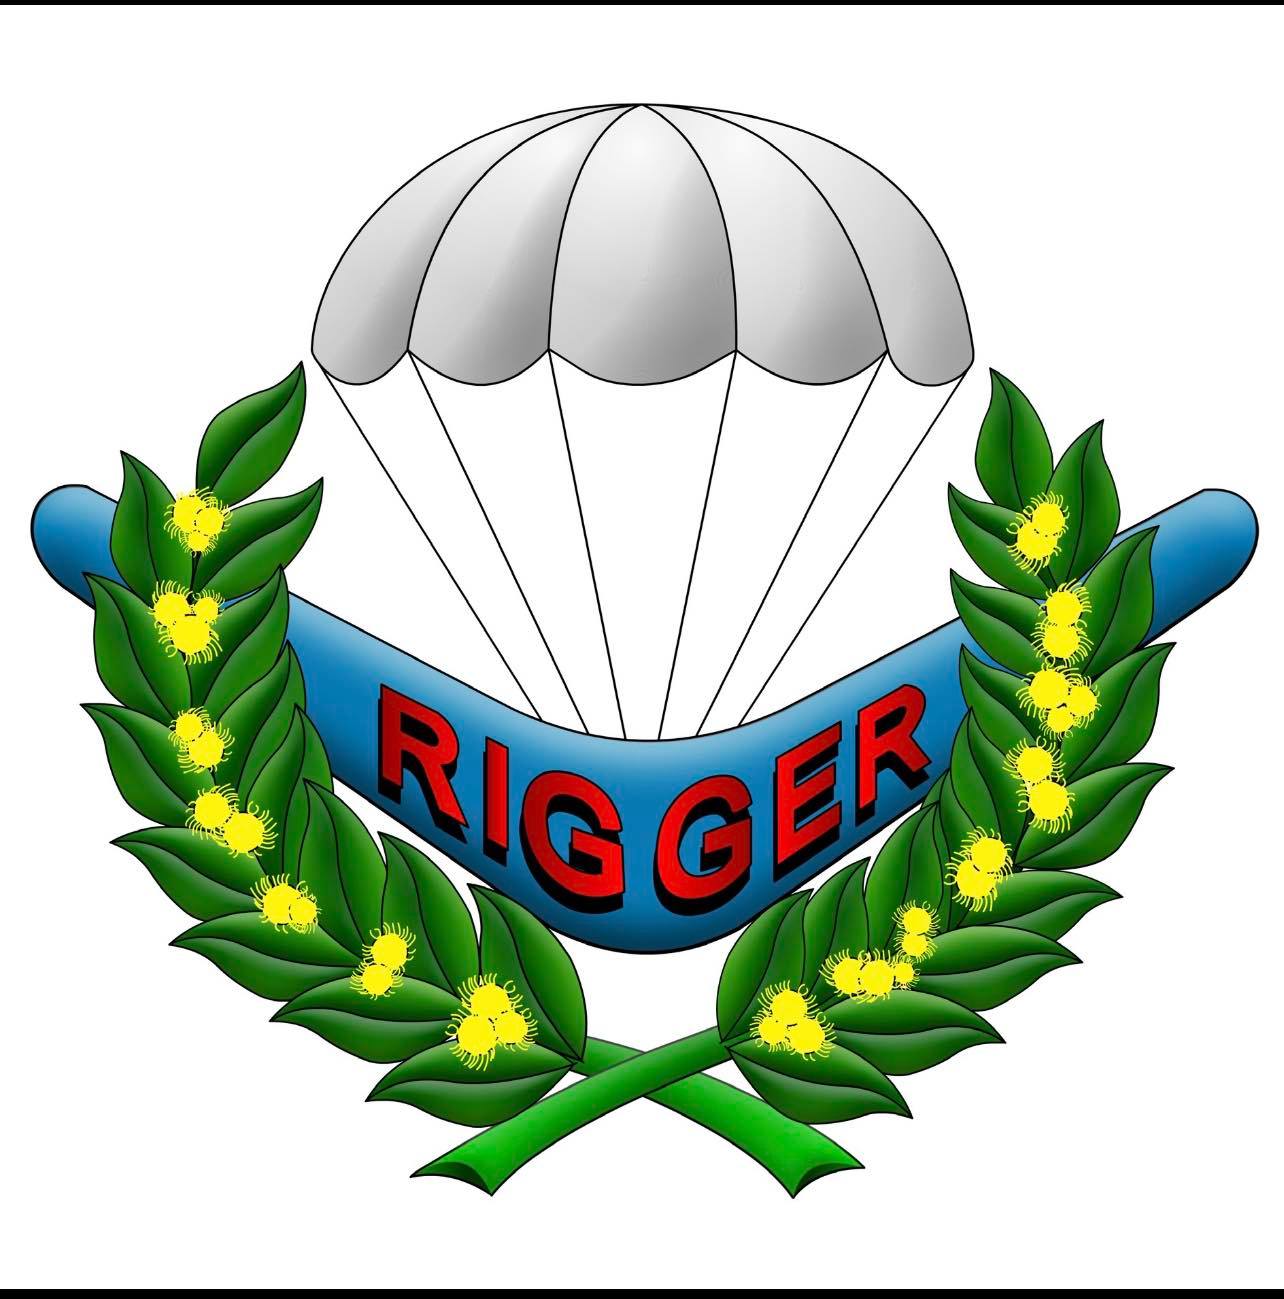 RIGGERS